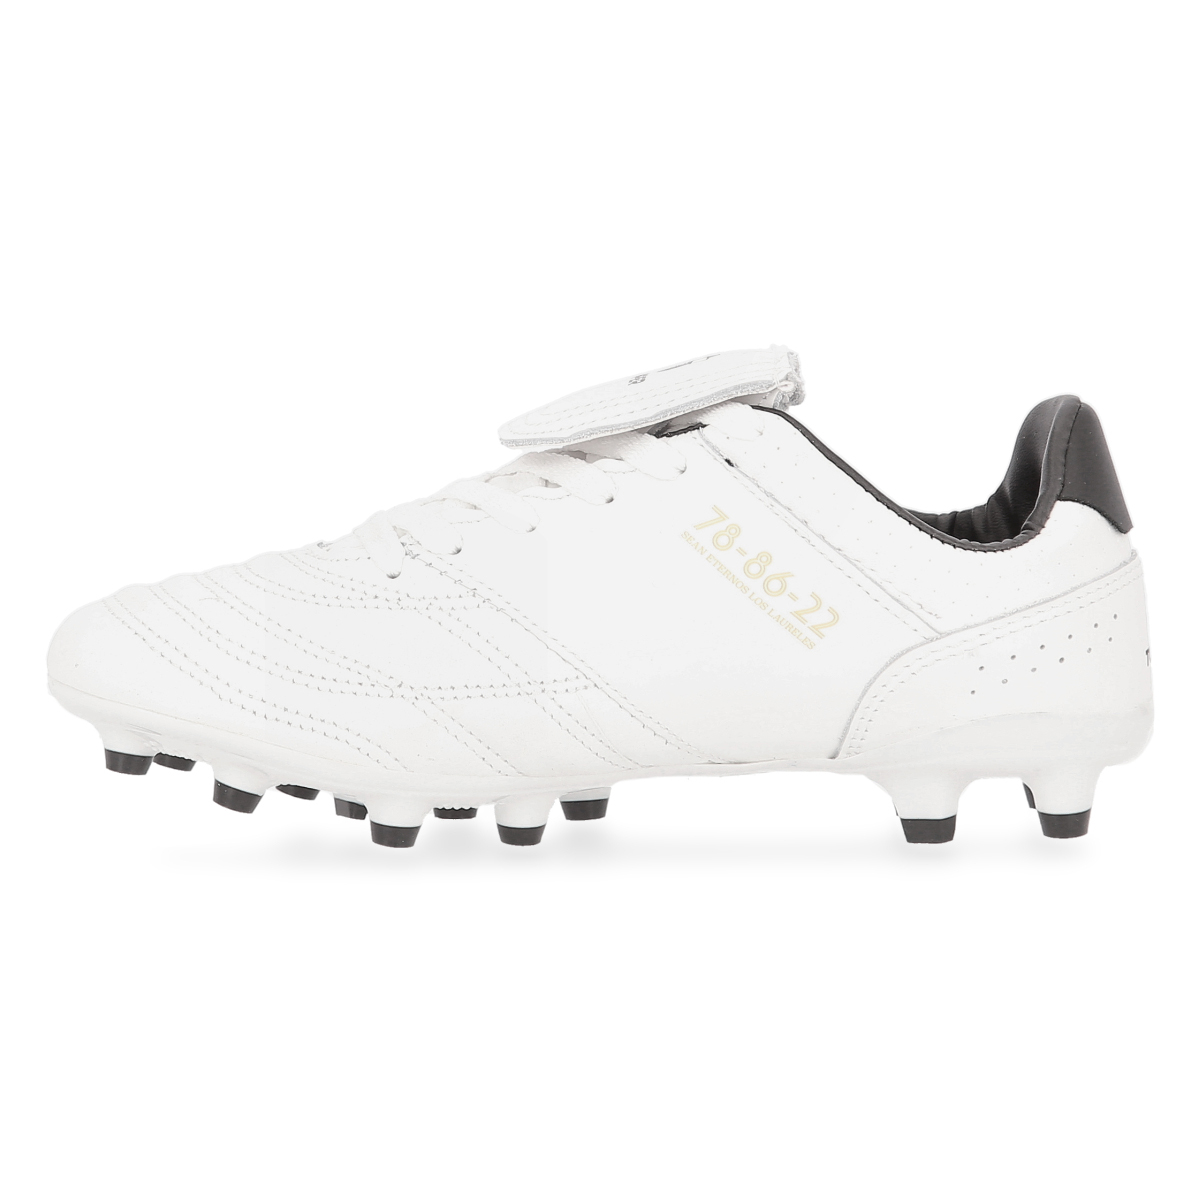 Botines Fútbol Topper Artis II Fg Hombre,  image number null